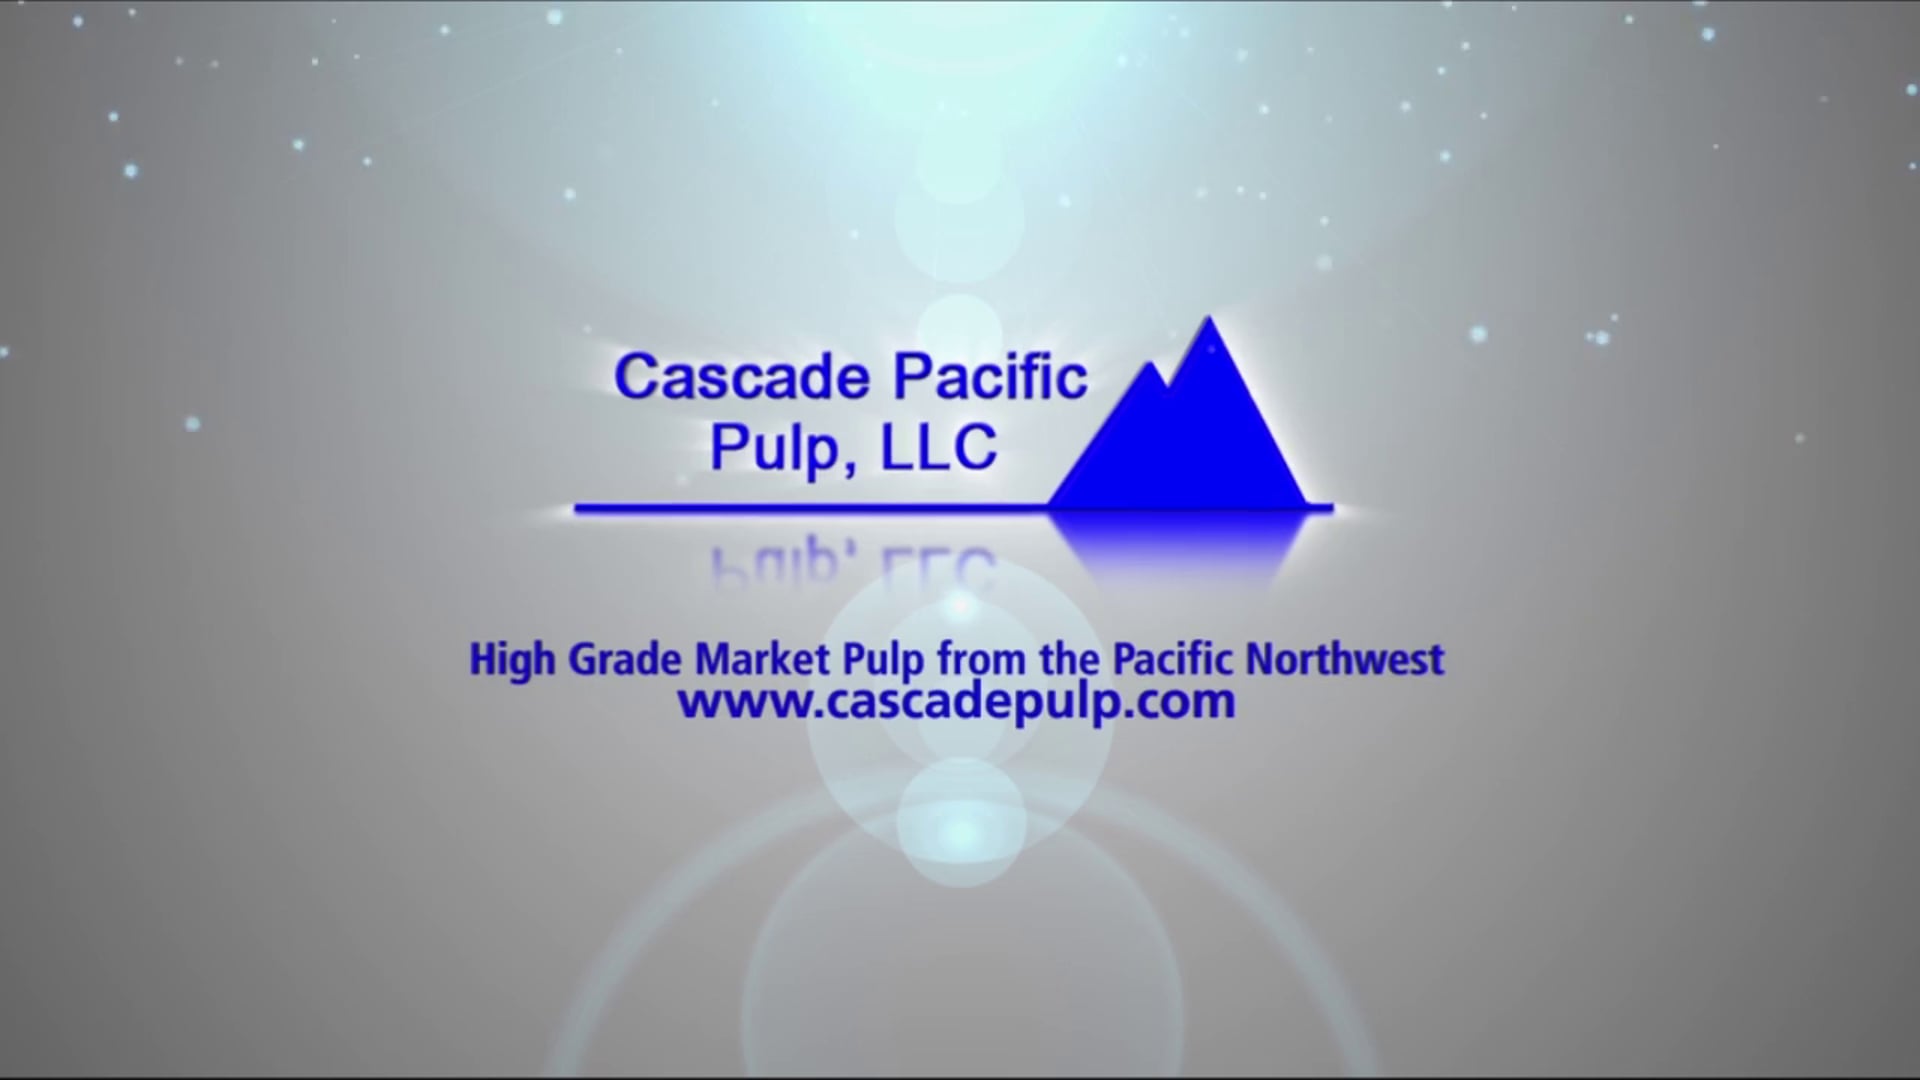 Welcome to Cascade Pacific Pulp